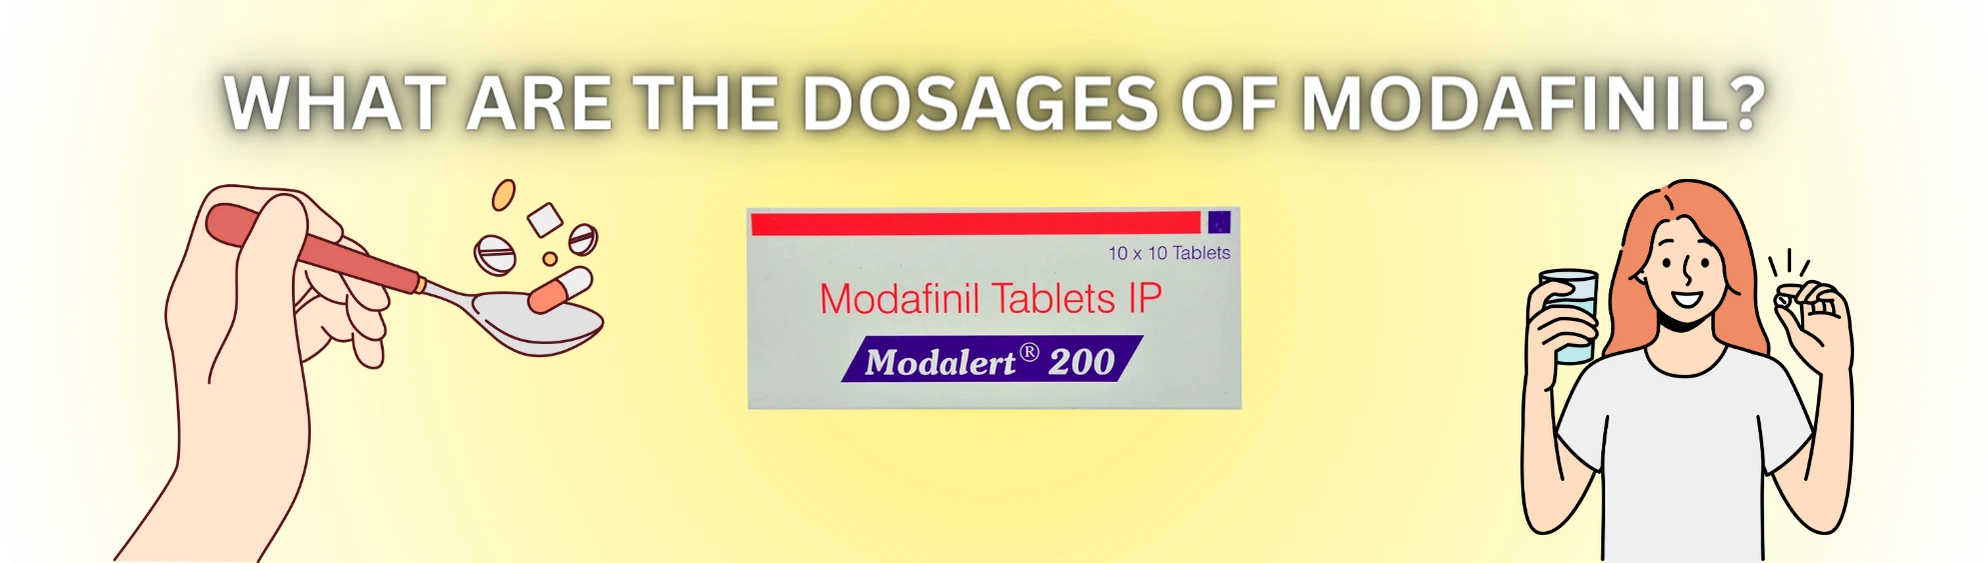 what-are-the-dosages-modafinil